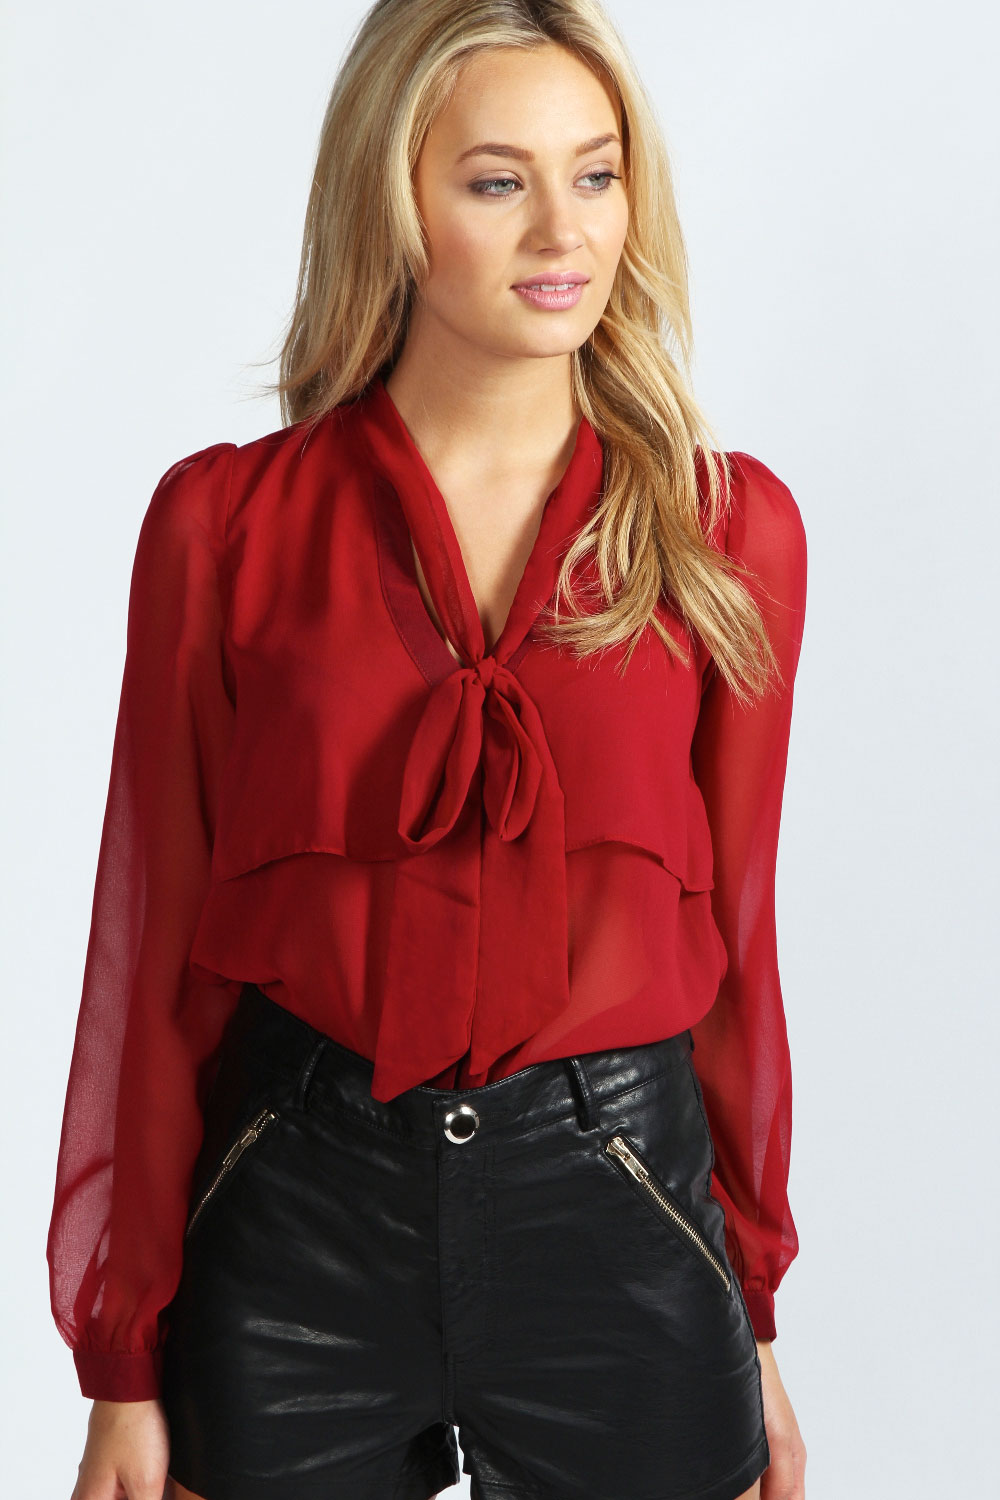 boohoo Lily Long Sleeve Pussybow Blouse - wine,